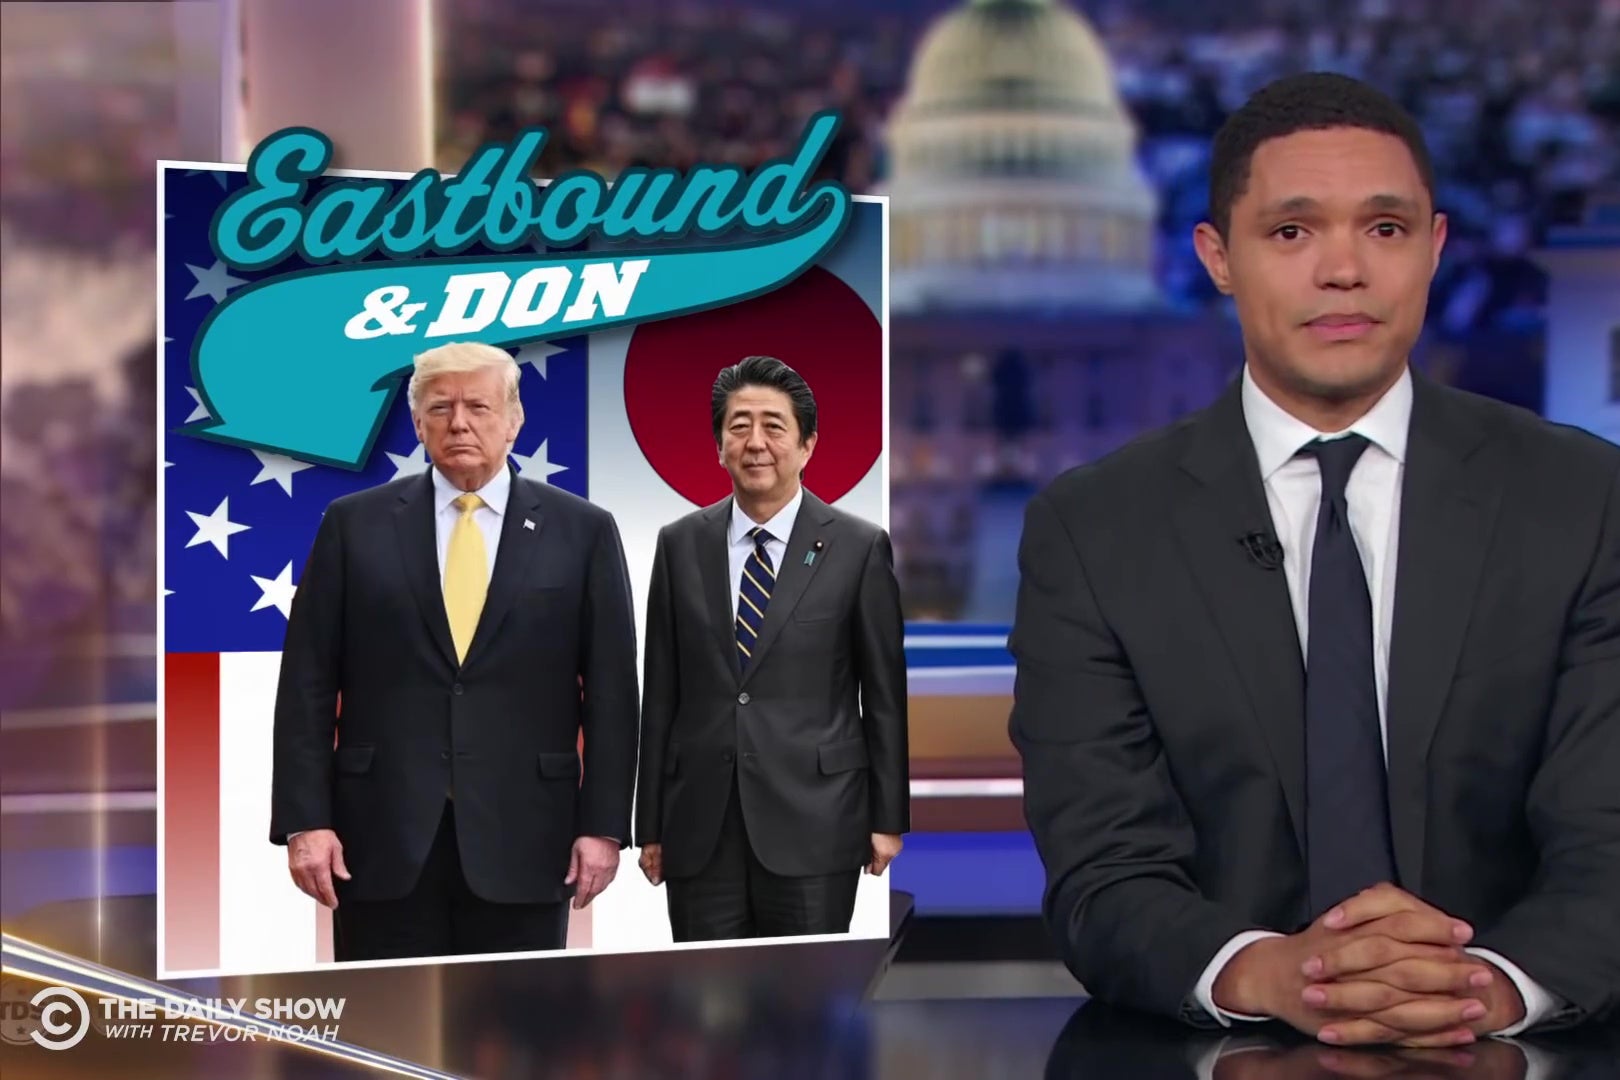 Trevor Noah in front of a photo of Trump and Shinzō Abe, captioned "Eastbound and Don."